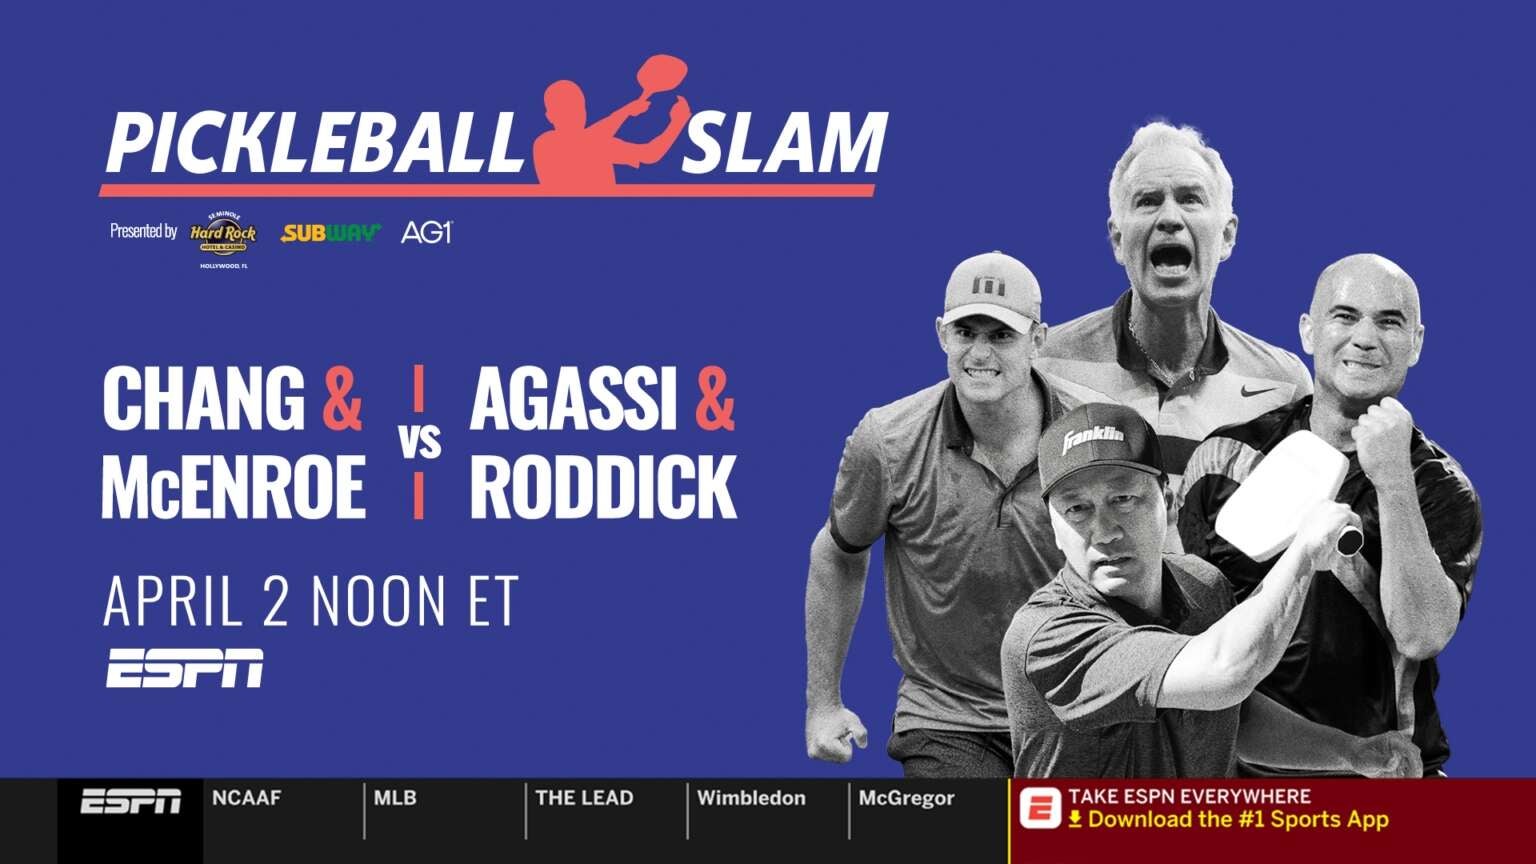 How to Watch Inaugural Pickleball Slam Tournament Live For Free Without